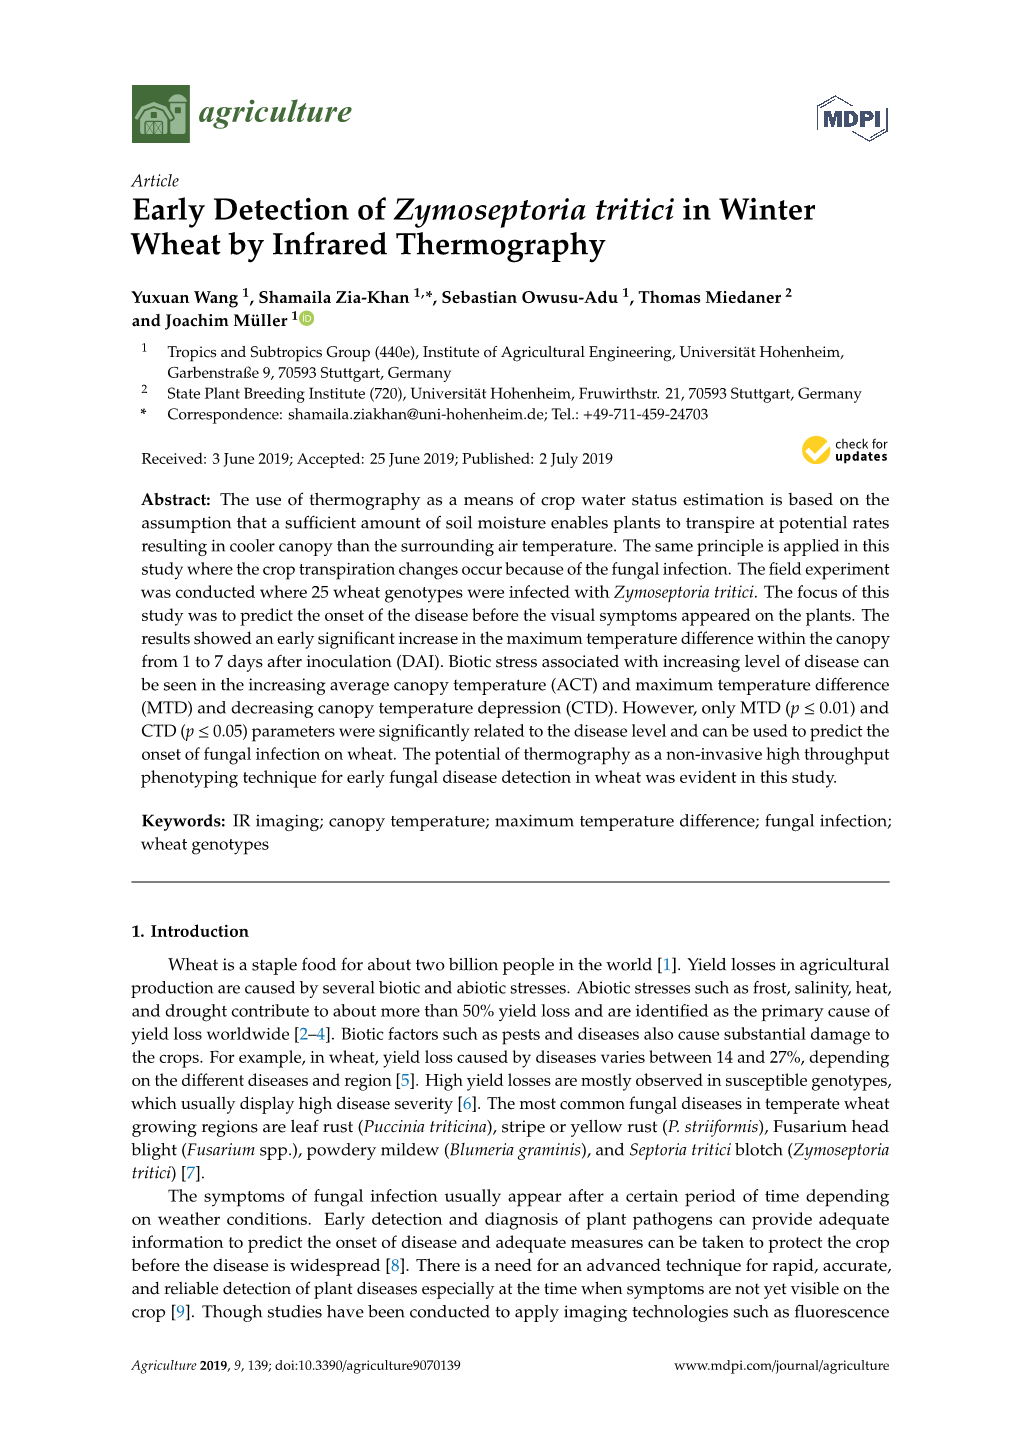 Early Detection of Zymoseptoria Tritici in Winter Wheat by Infrared Thermography